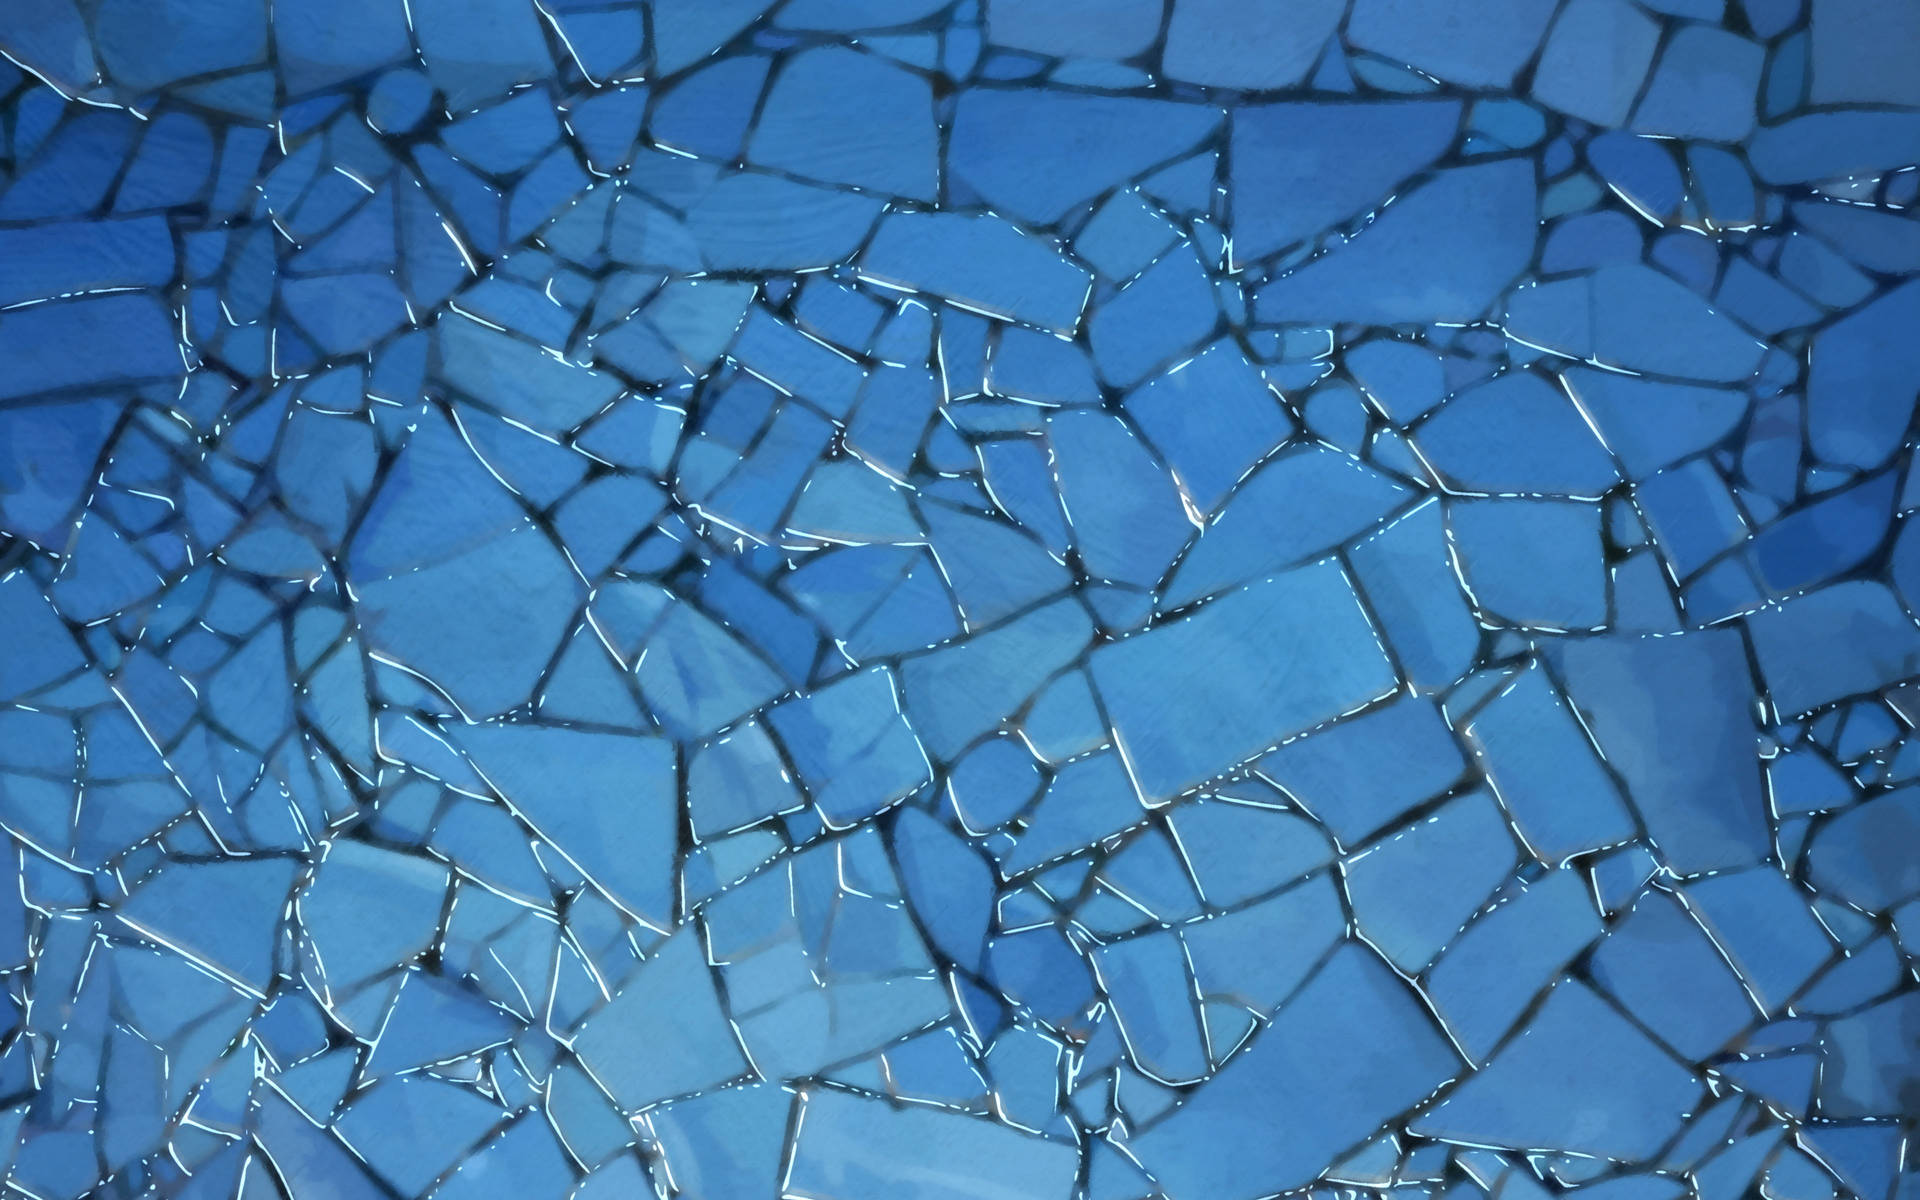 Shattered Beauty - A Spectacle Of Broken Glass Tiles